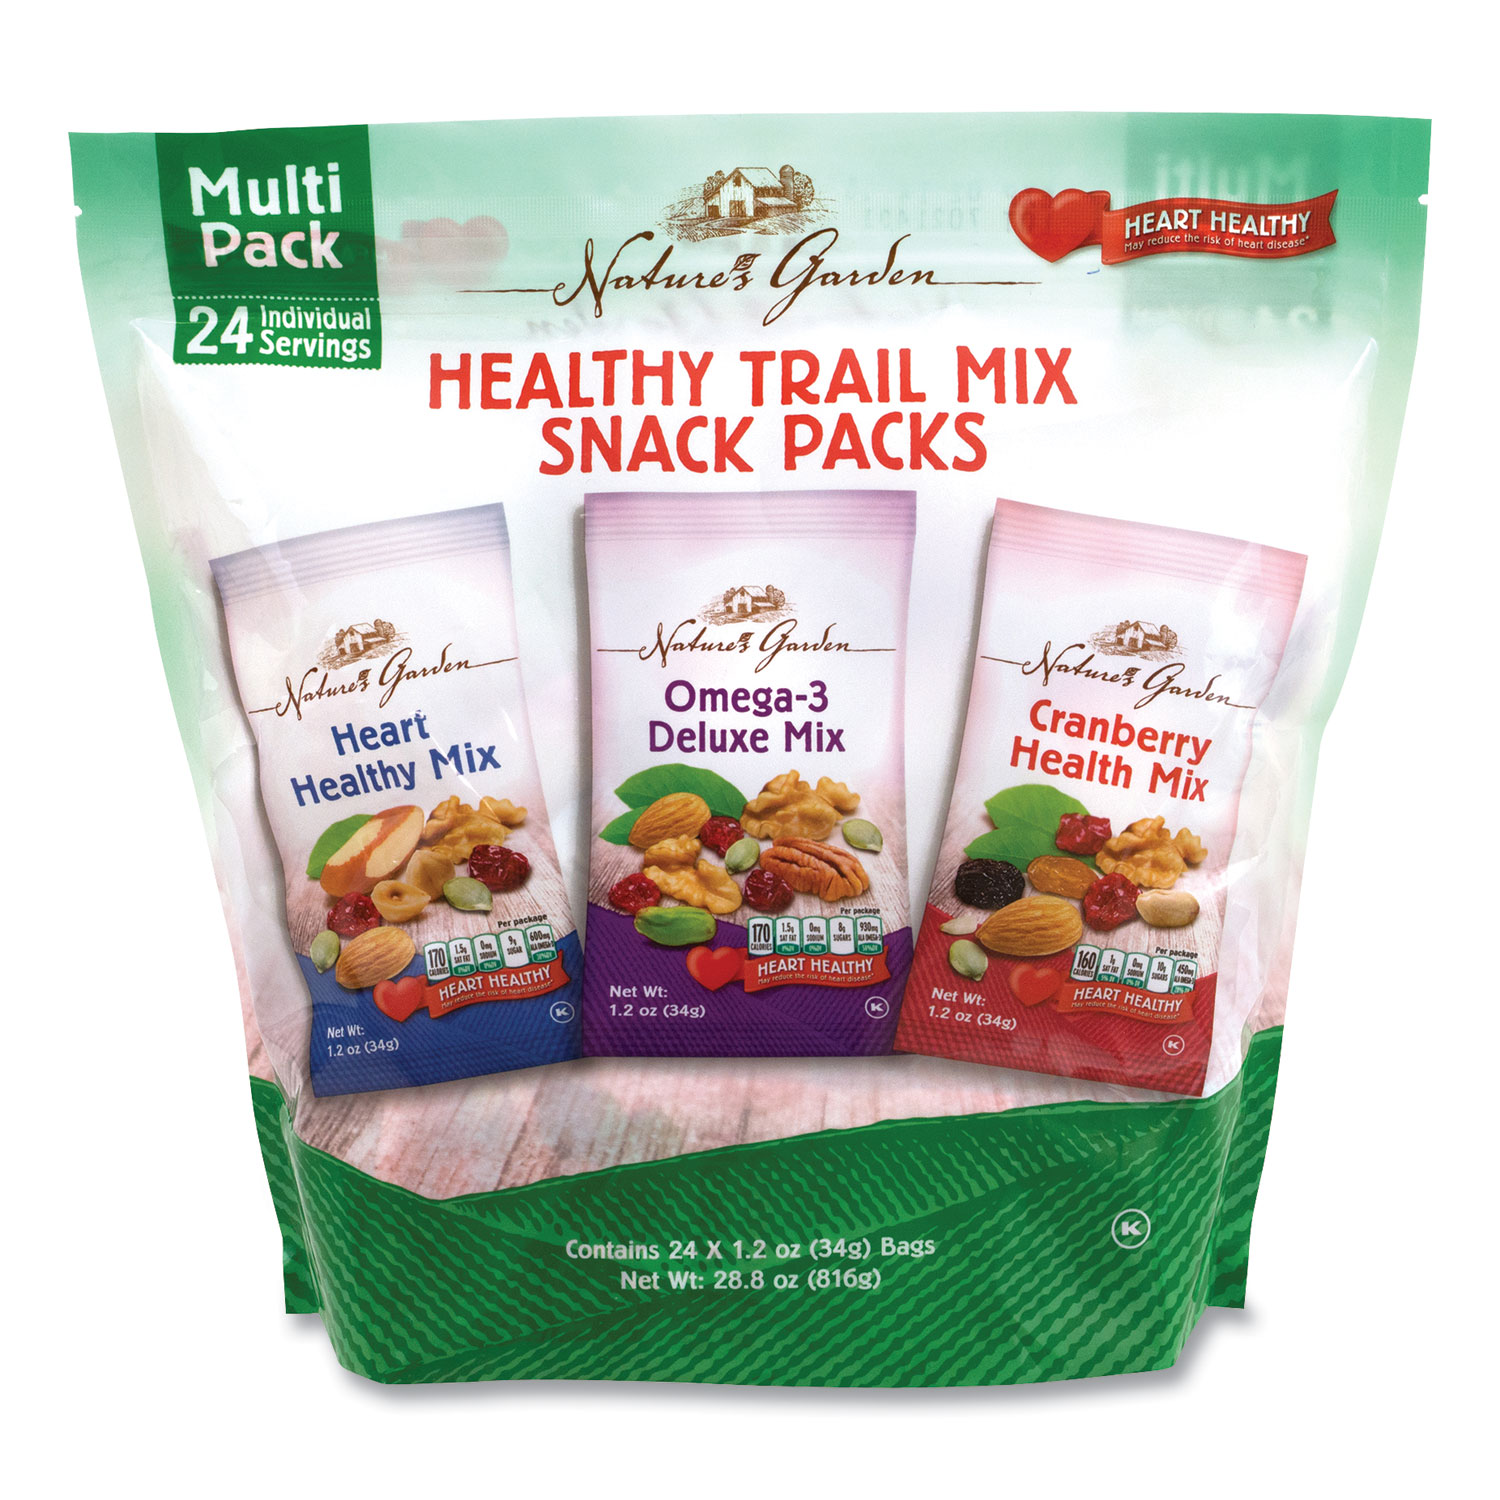  Nature's Garden 7060 Healthy Trail Mix Snack Packs, 1.2 oz Pouch, 24 Pouches/Box, Free Delivery in 1-4 Business Days (GRR29400003) 